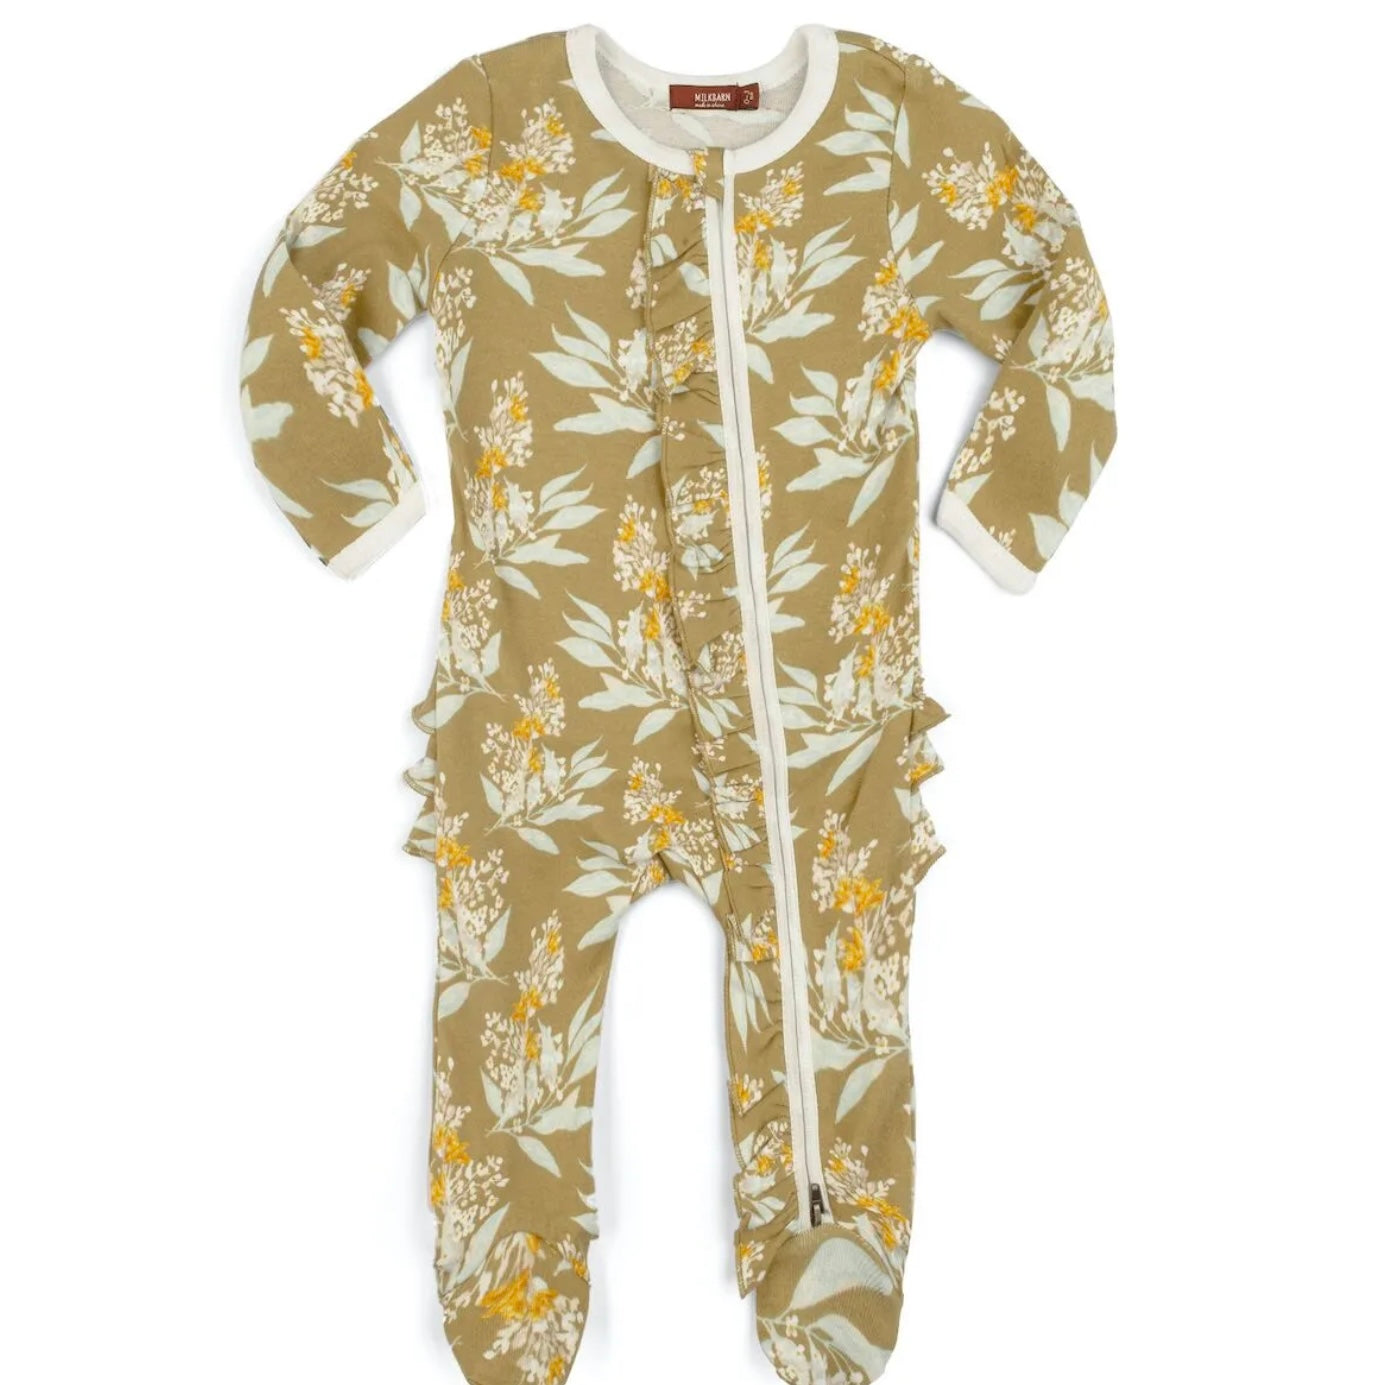 Gold Floral Organic Cotton Ruffle Zipper Footed Romper